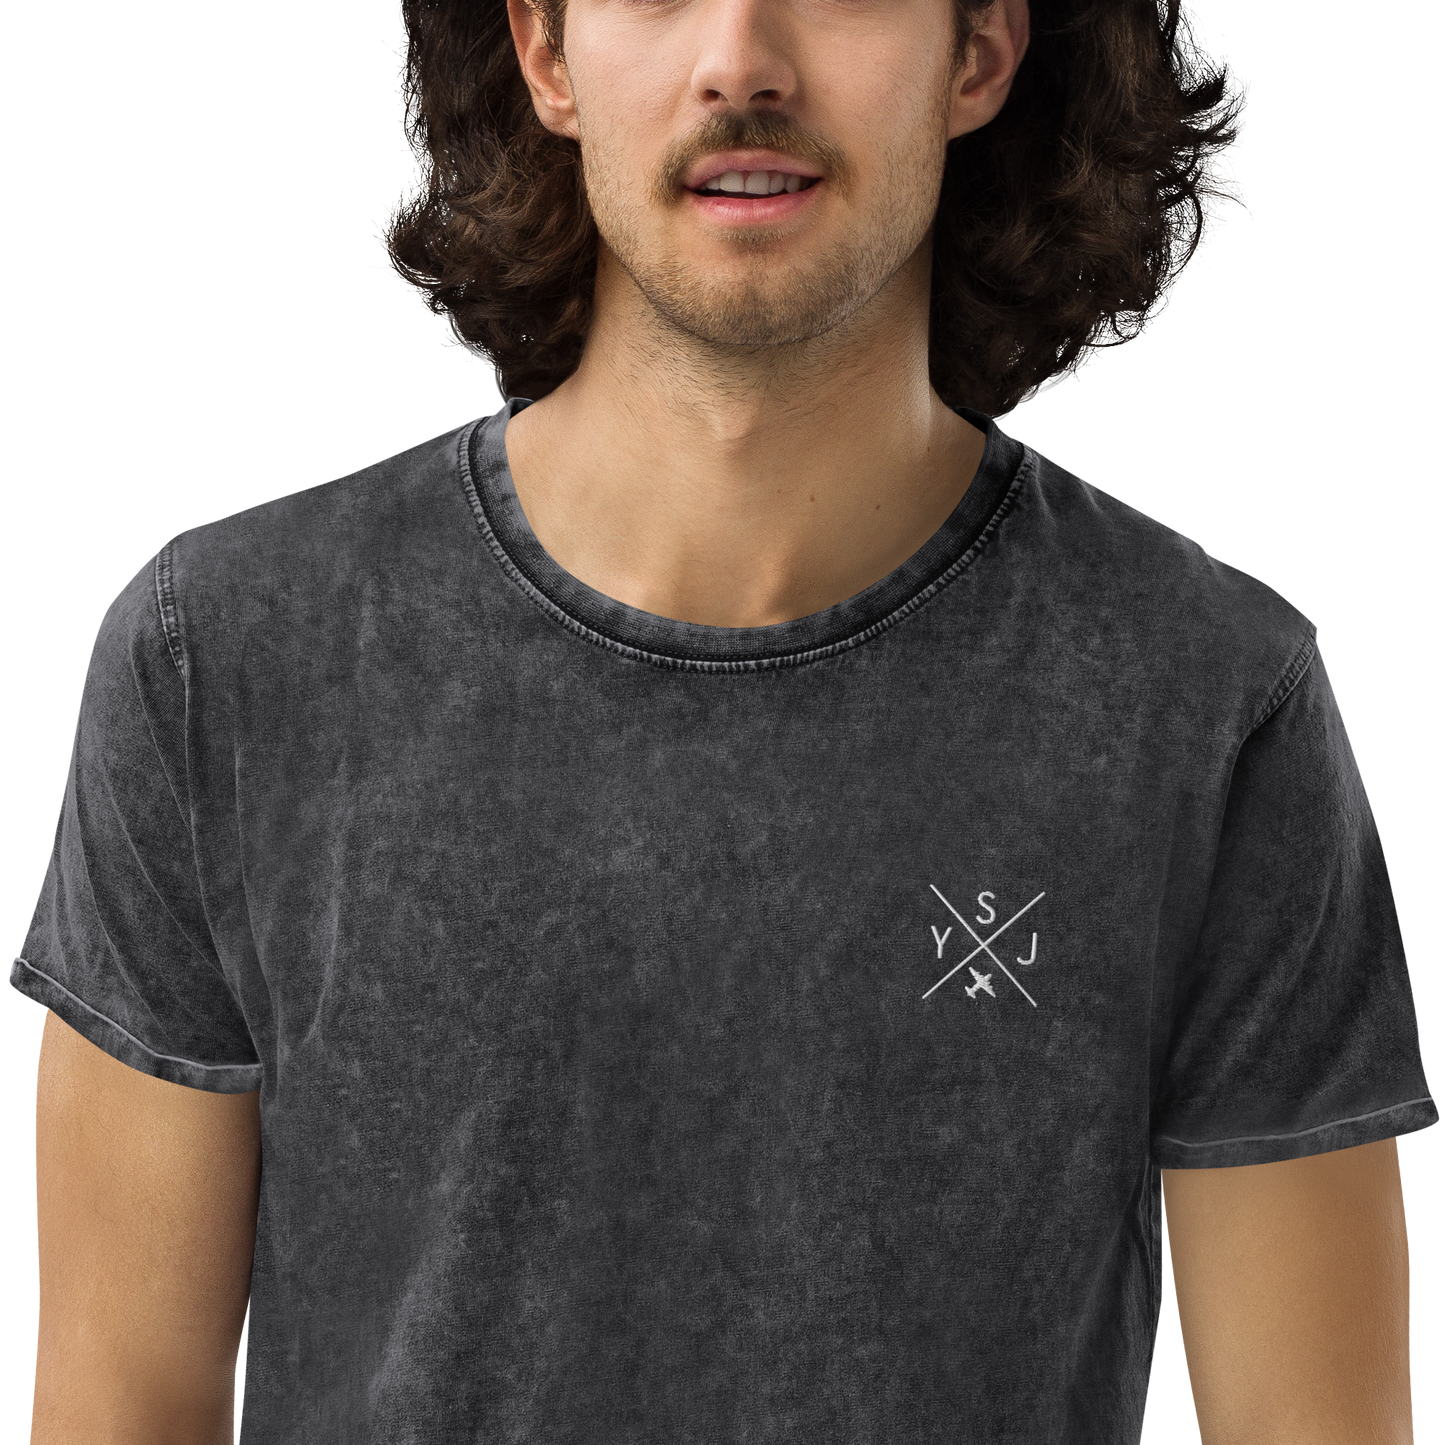 YHM Designs - YSJ Saint John Denim T-Shirt - Crossed-X Design with Airport Code and Vintage Propliner - White Embroidery - Image 07